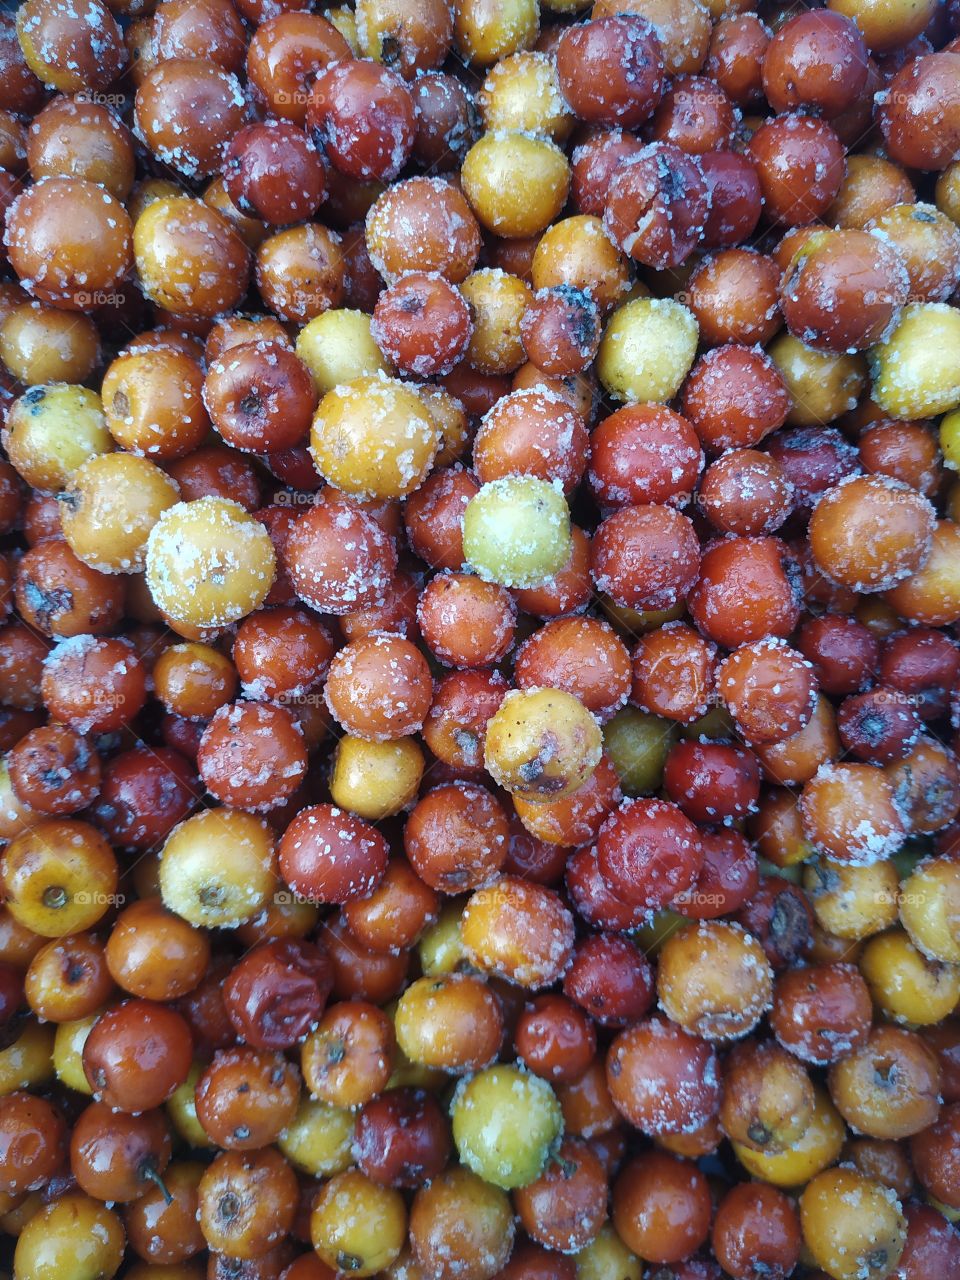 Blackberry fruit food natural sweet color yellow red mix